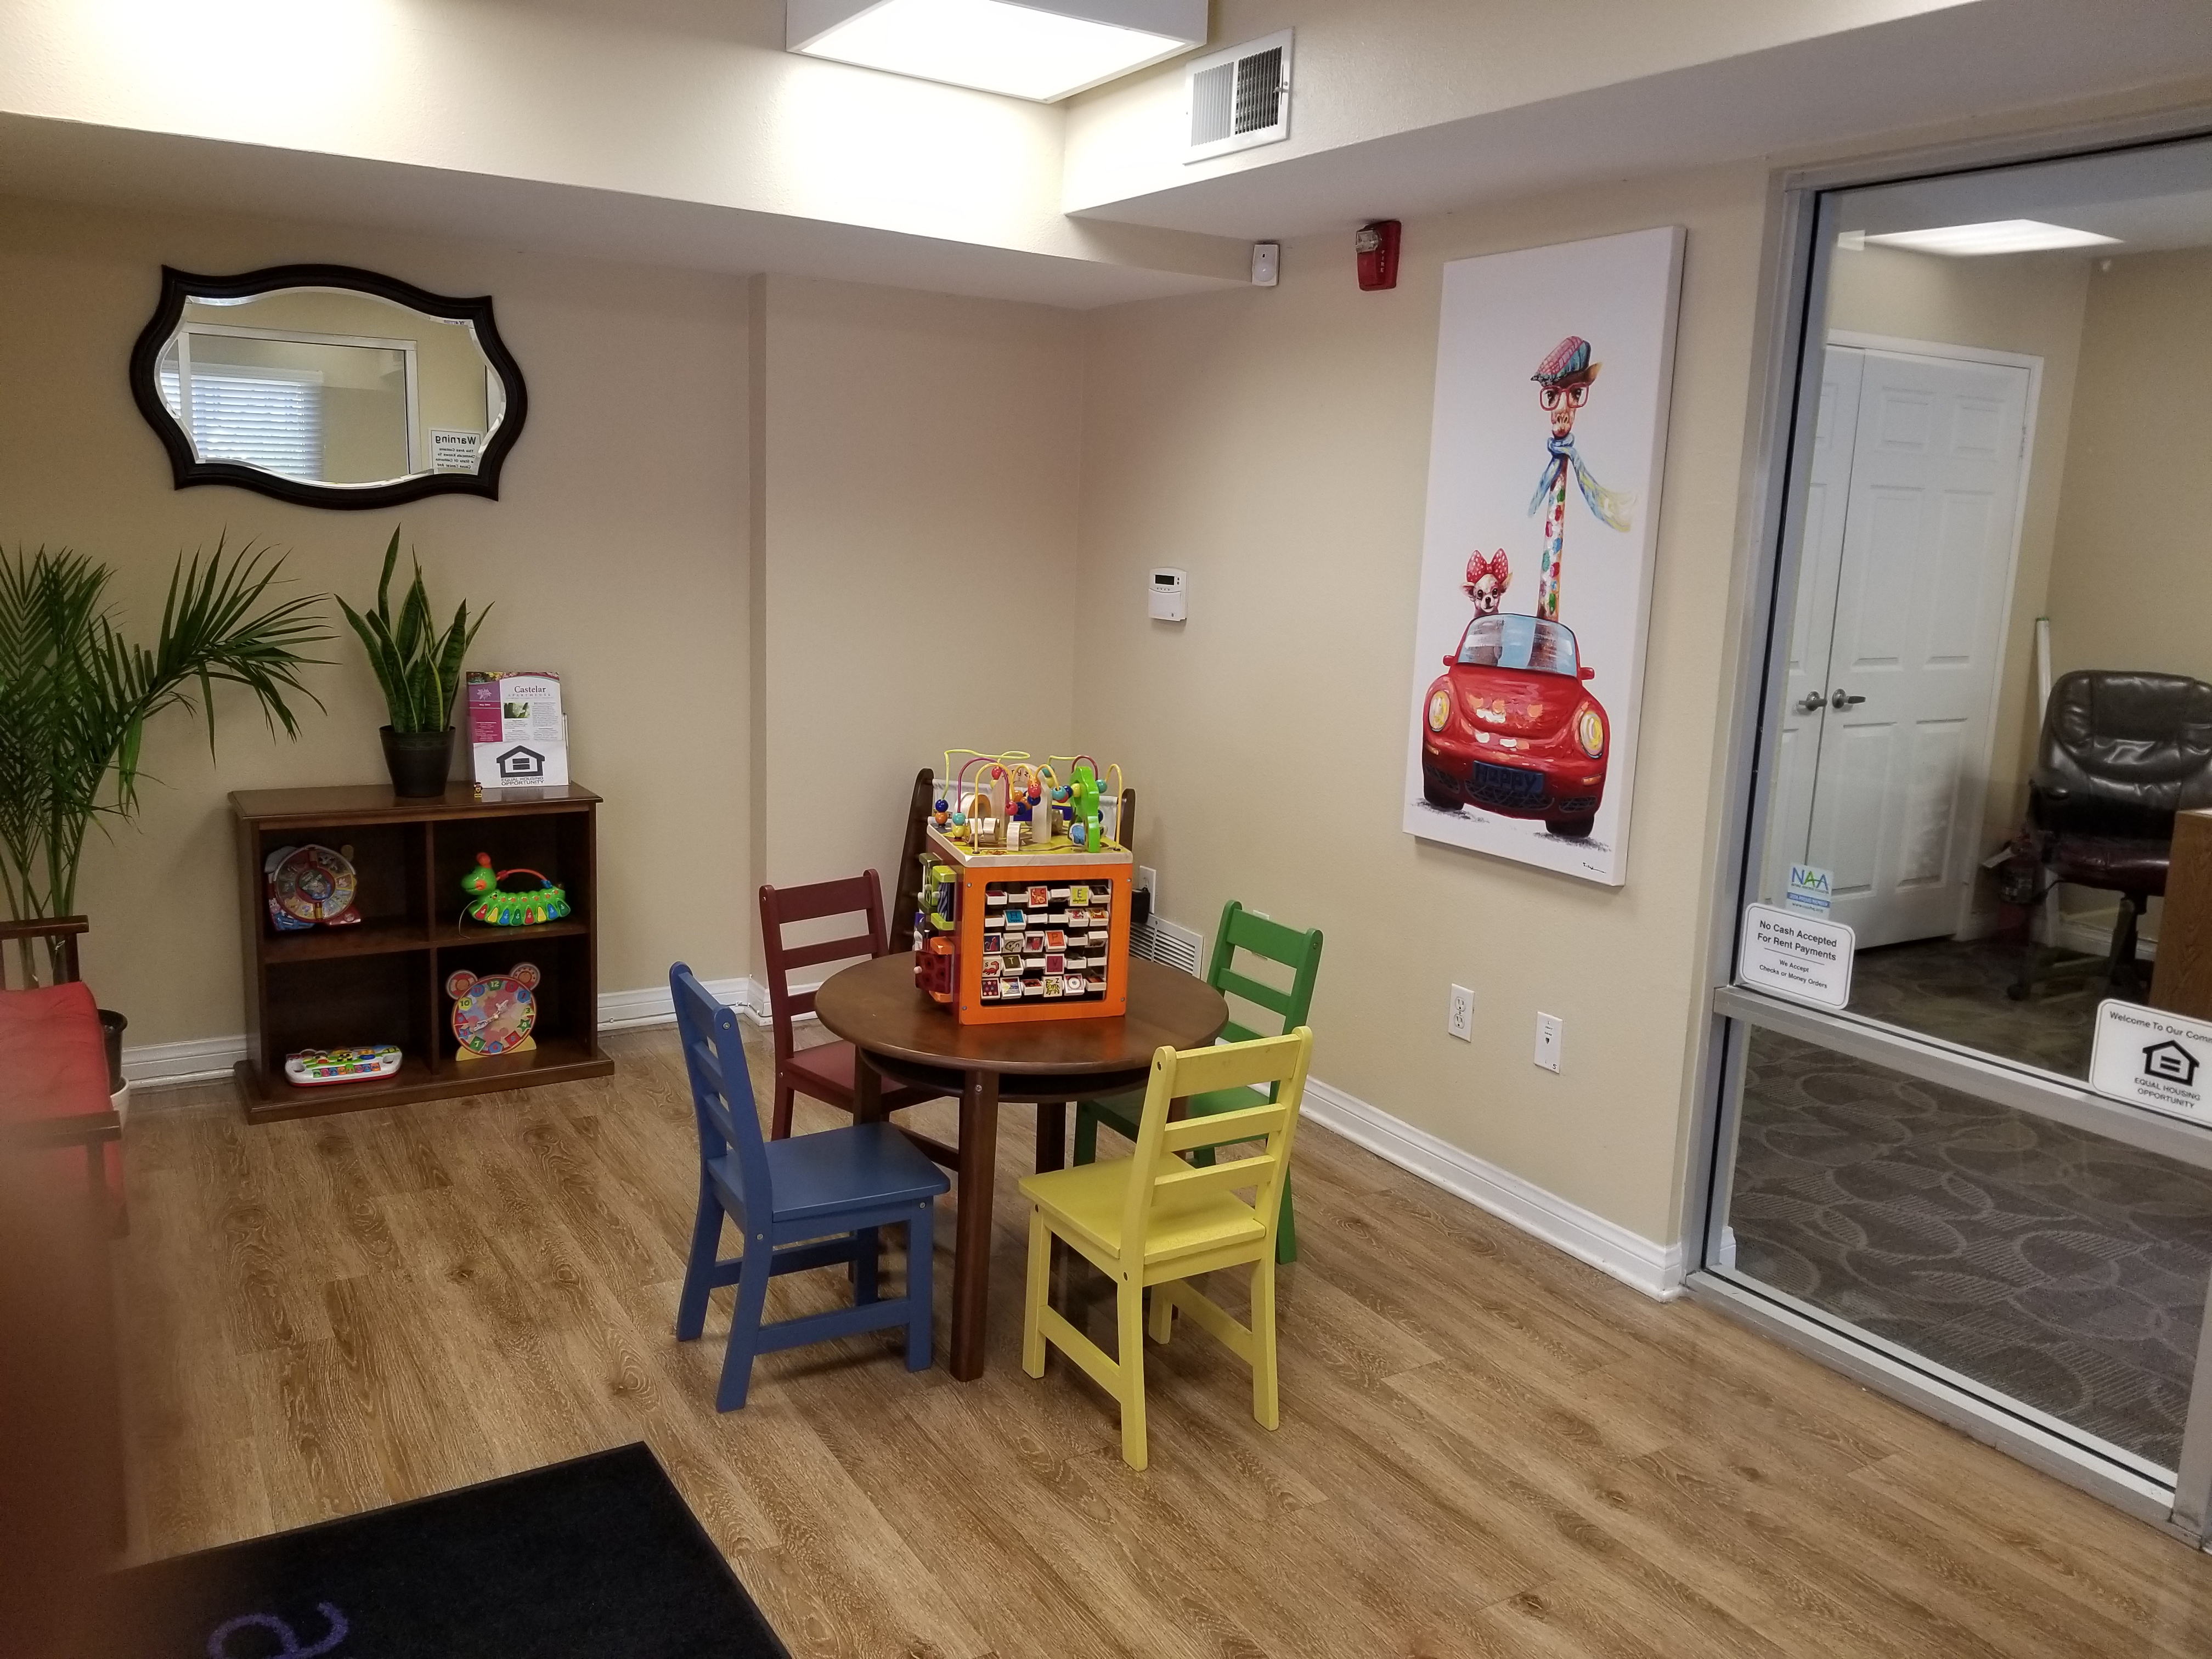 Interior view of a waiting area at the Castelar Apartments with children's table and a red, yellow, blue and green chair around. Childrens toys in cubbies and on top of table.